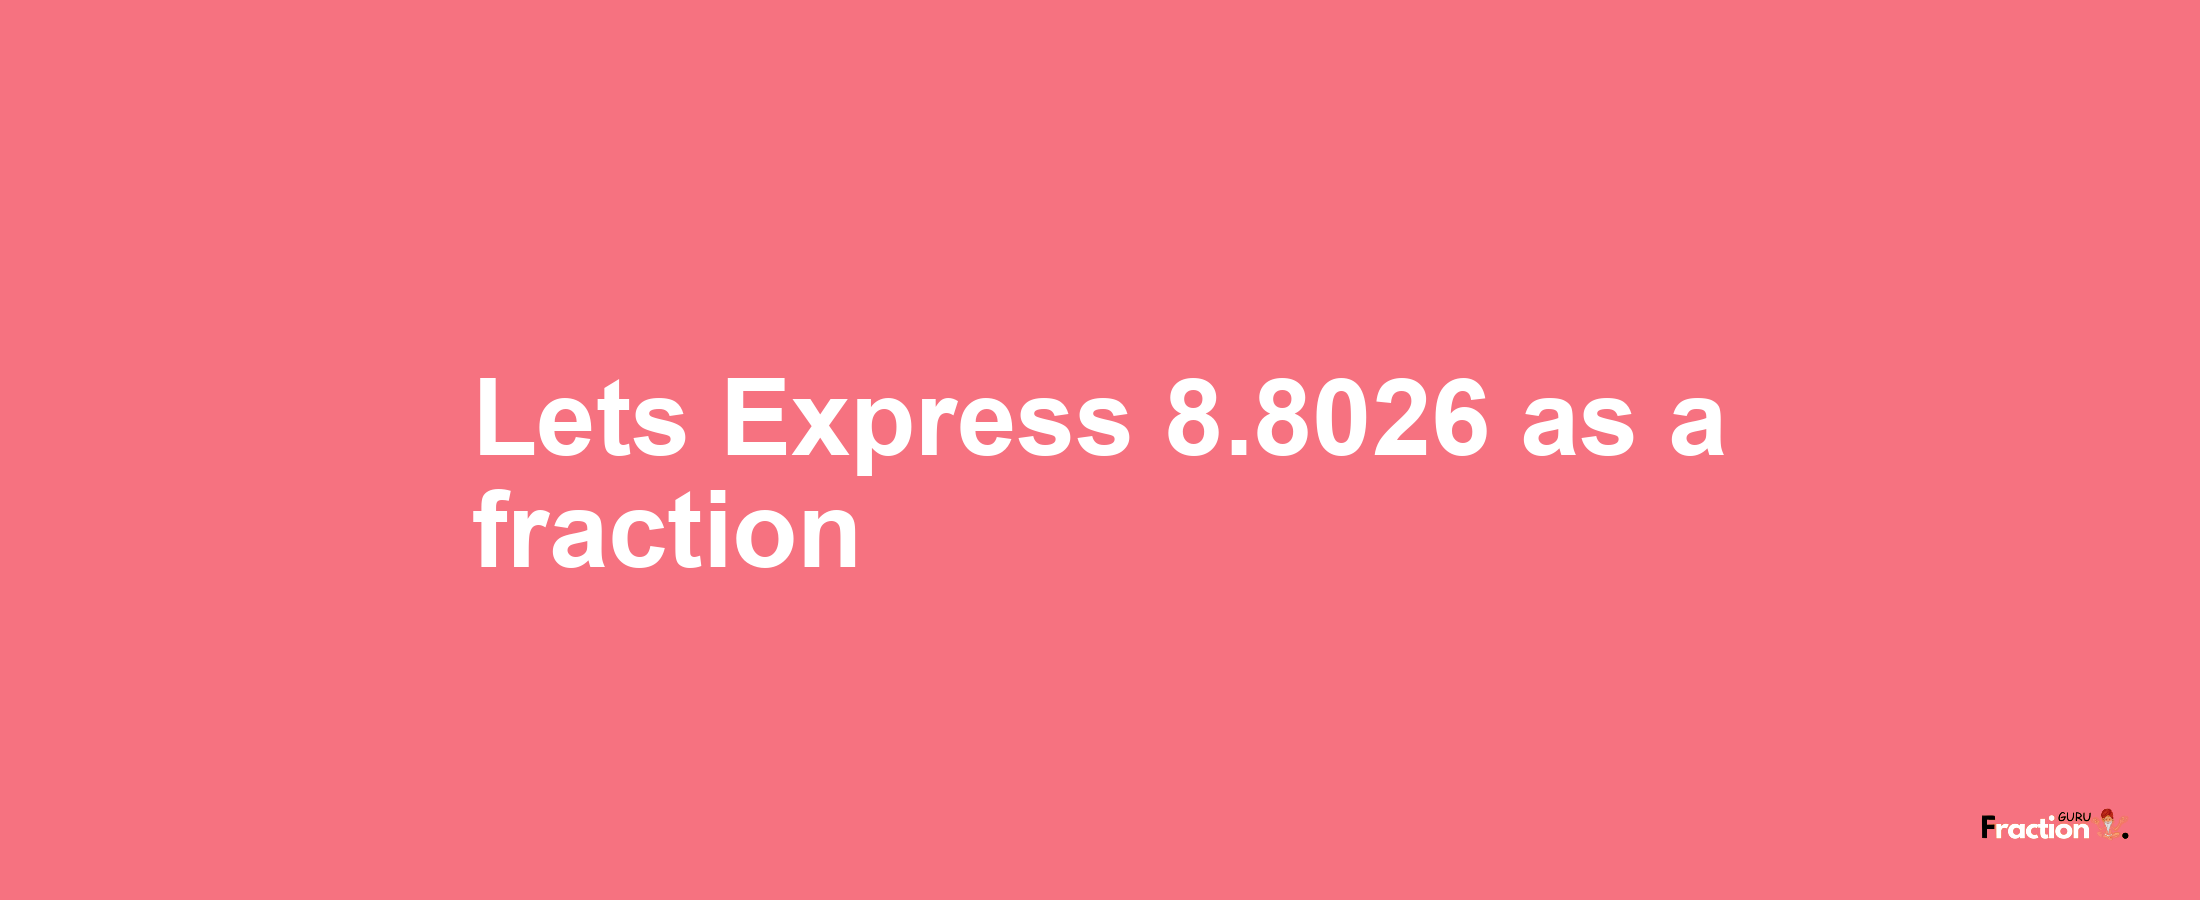 Lets Express 8.8026 as afraction